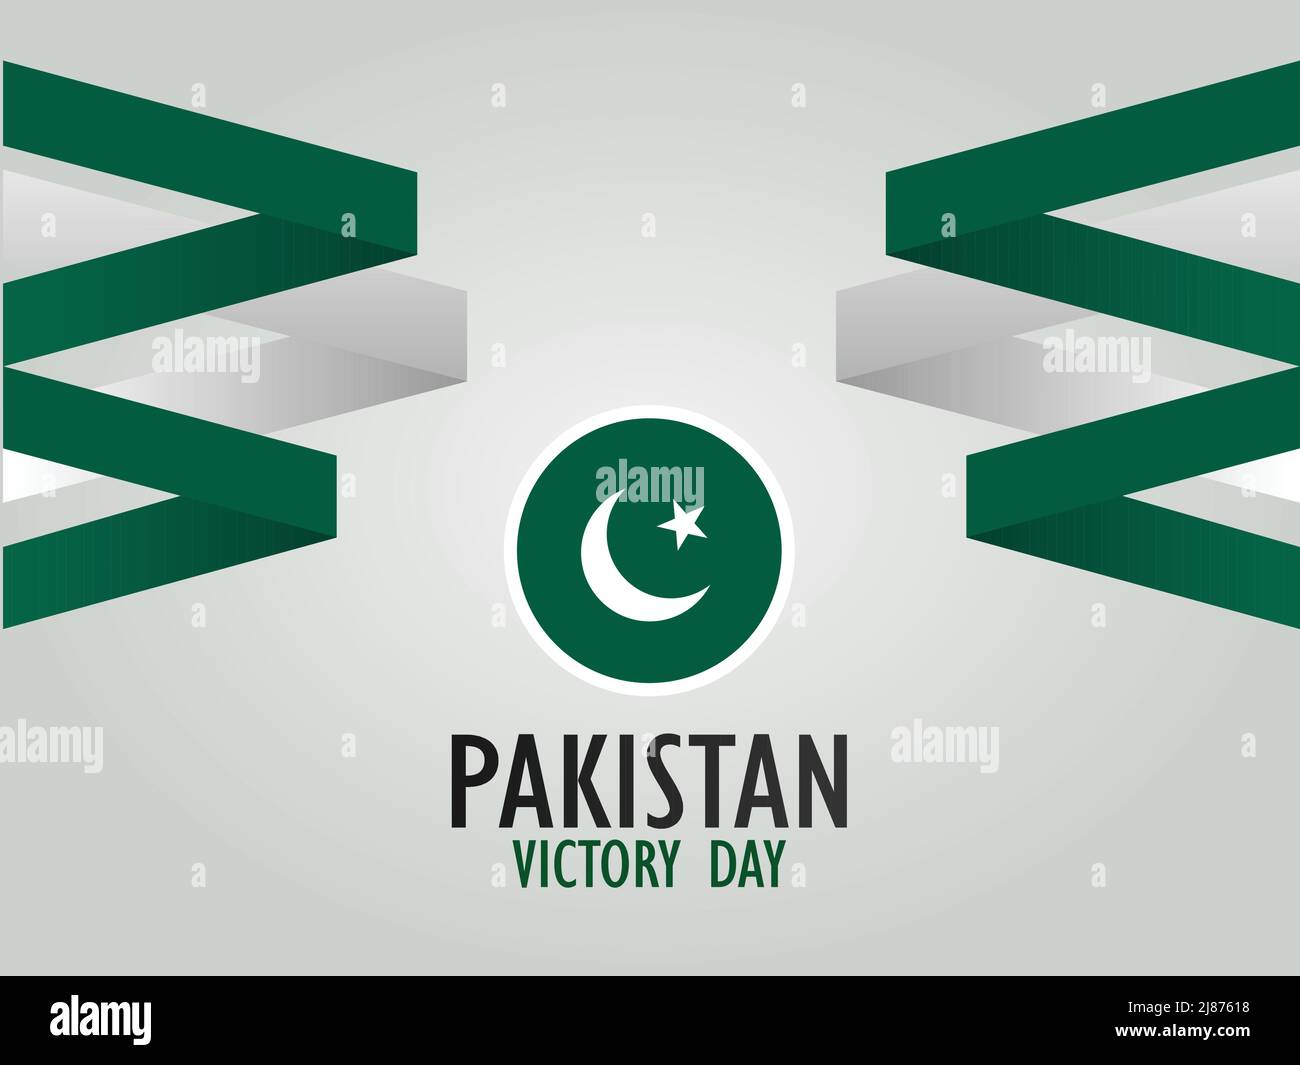 Pakistan victory day celebration background template design in vector format Stock Vector